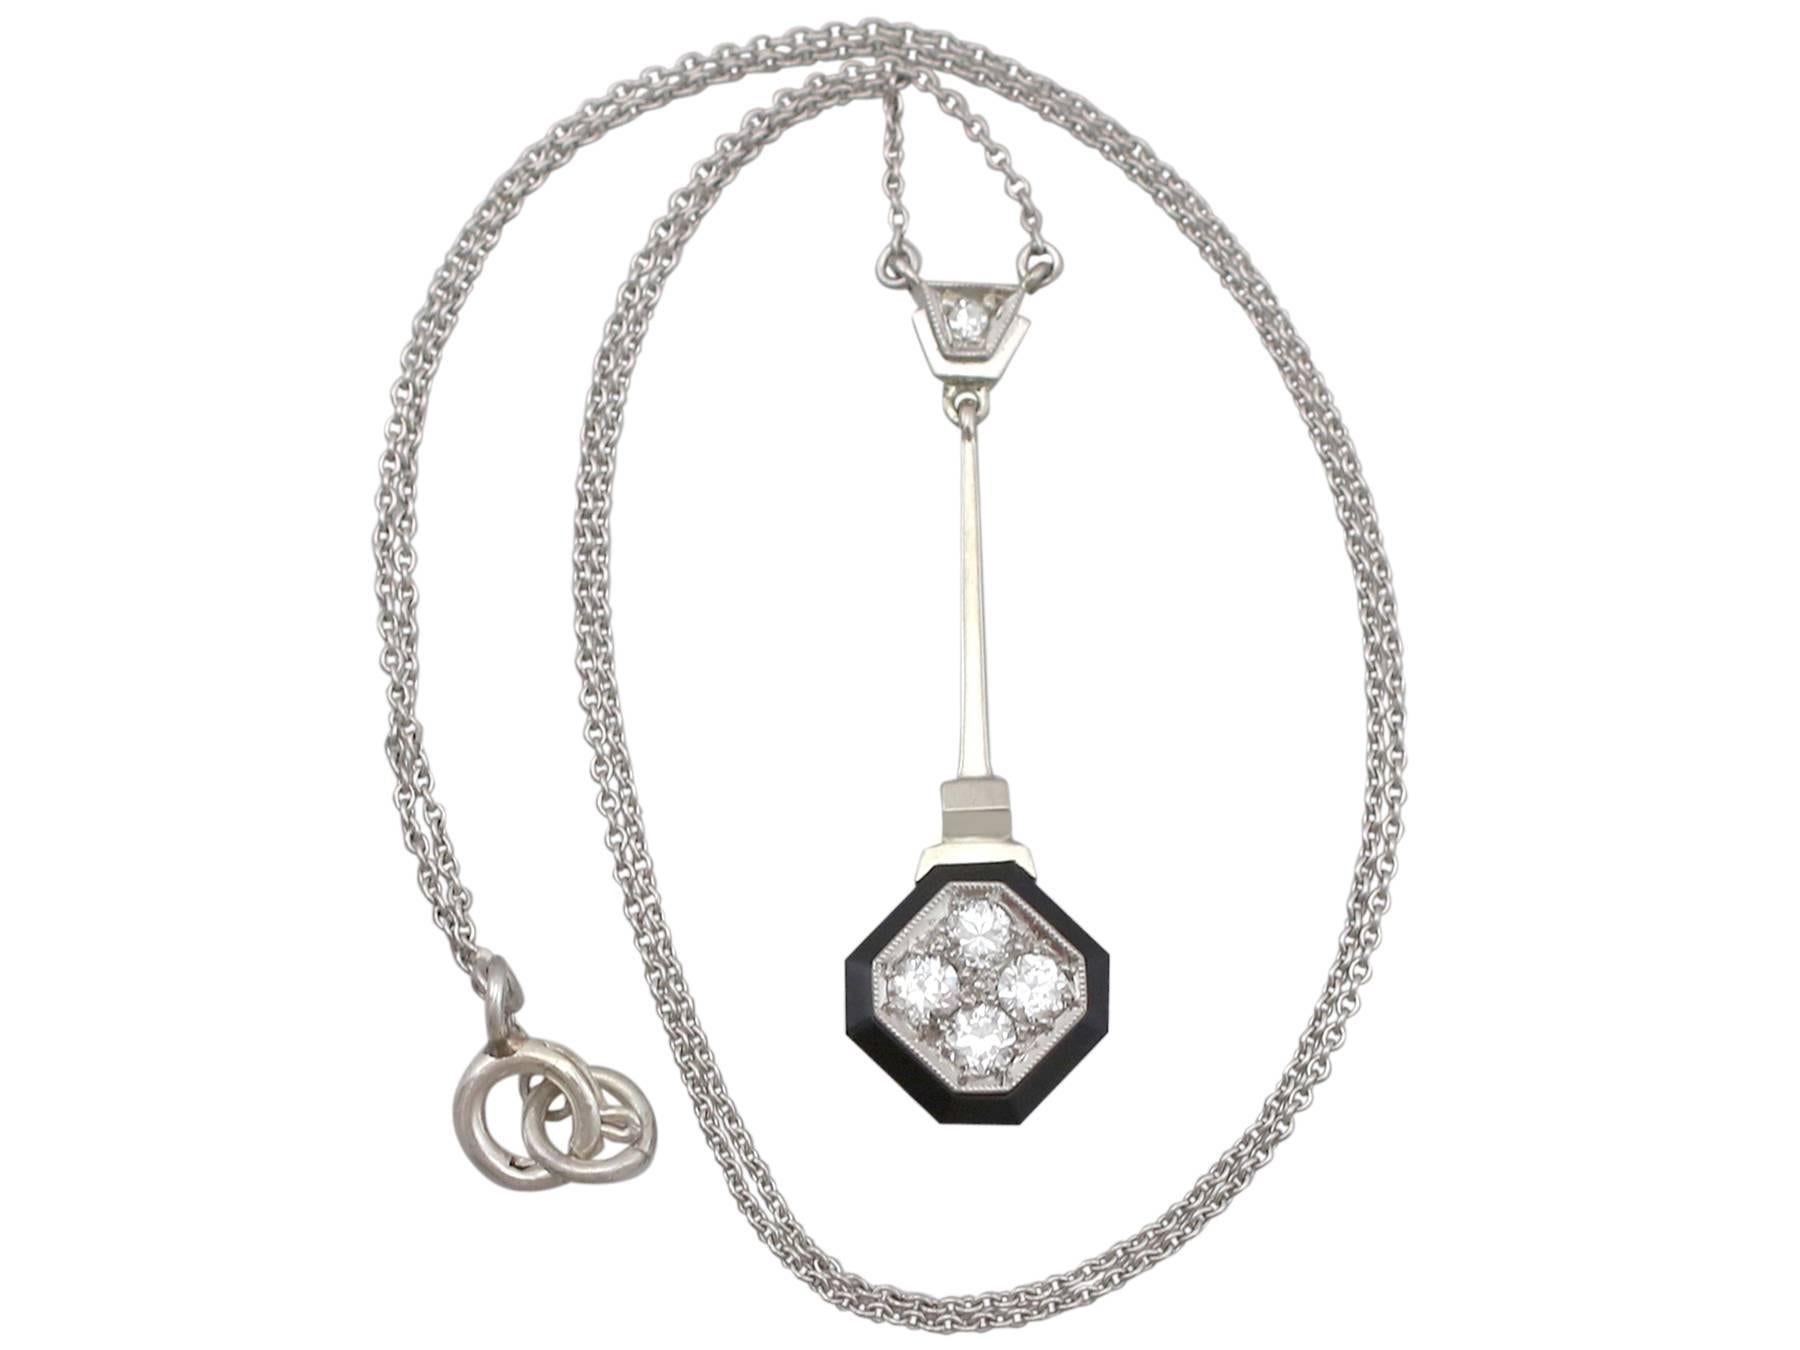 An impressive antique 1930's Art Deco 0.38 Ct diamond and black onyx, 14k white gold necklace; part of our diverse antique jewelery and estate jewelry collections.

This fine and impressive diamond and onyx necklace has been crafted in 14k white